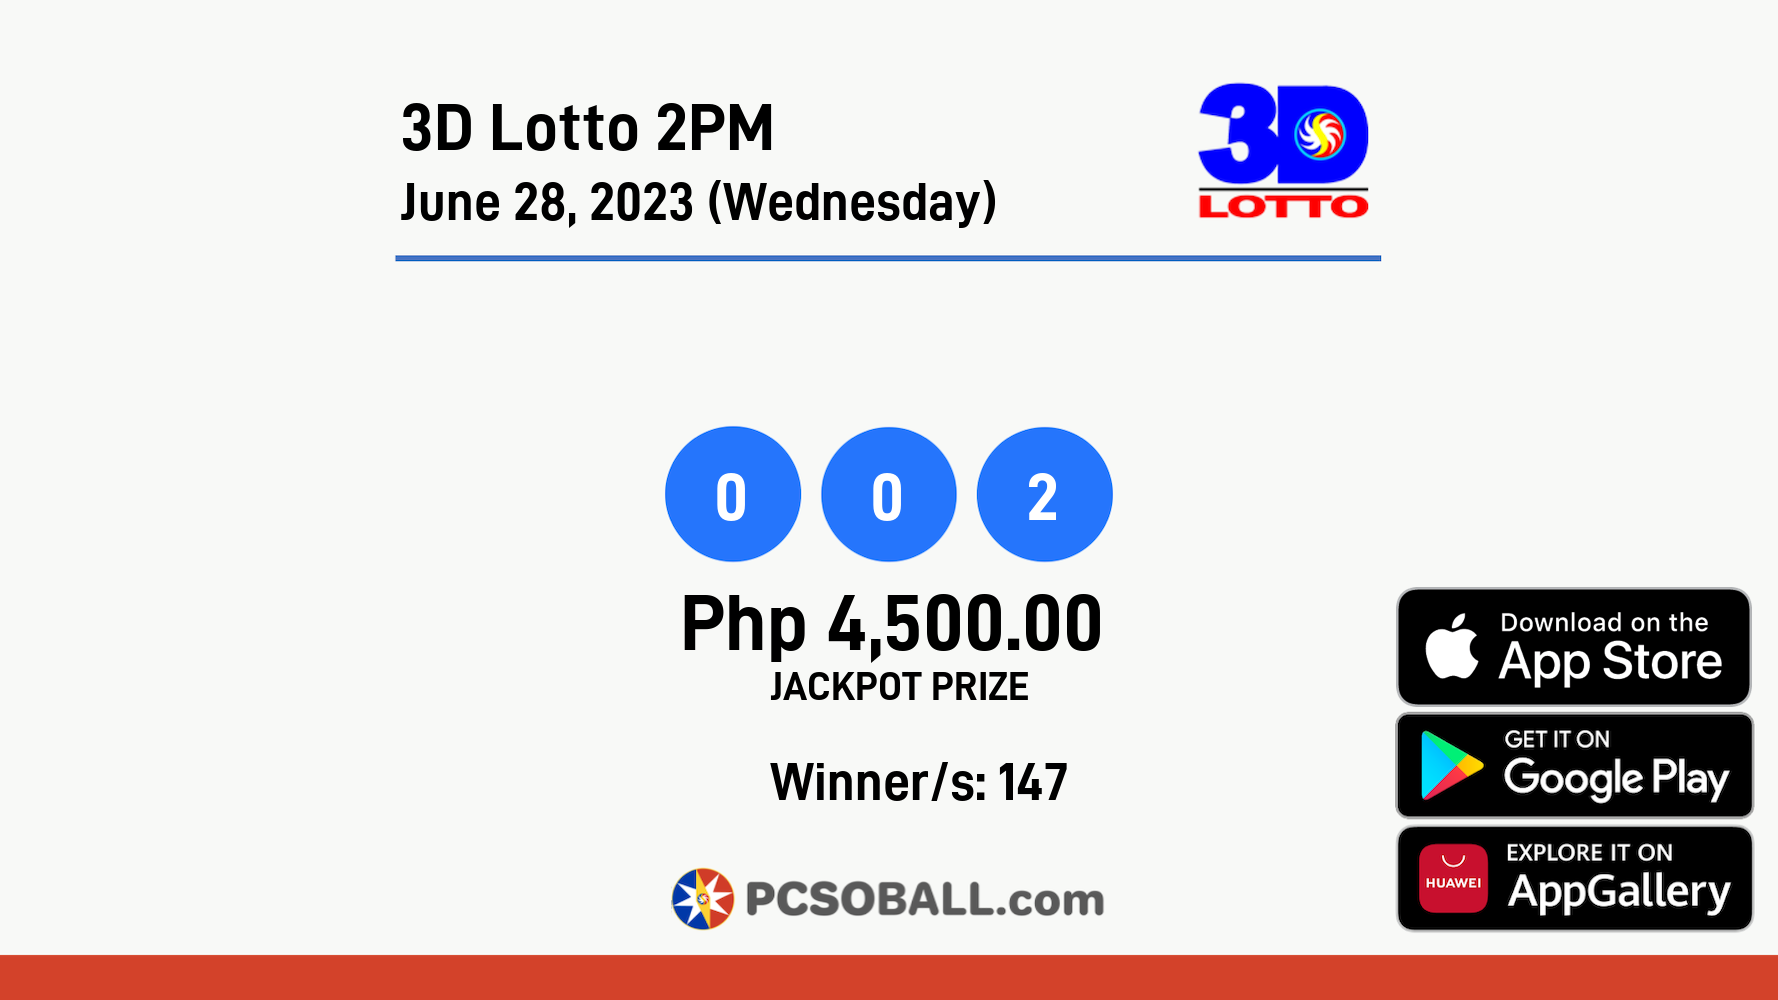 3D Lotto 2PM June 28, 2023 (Wednesday) Result